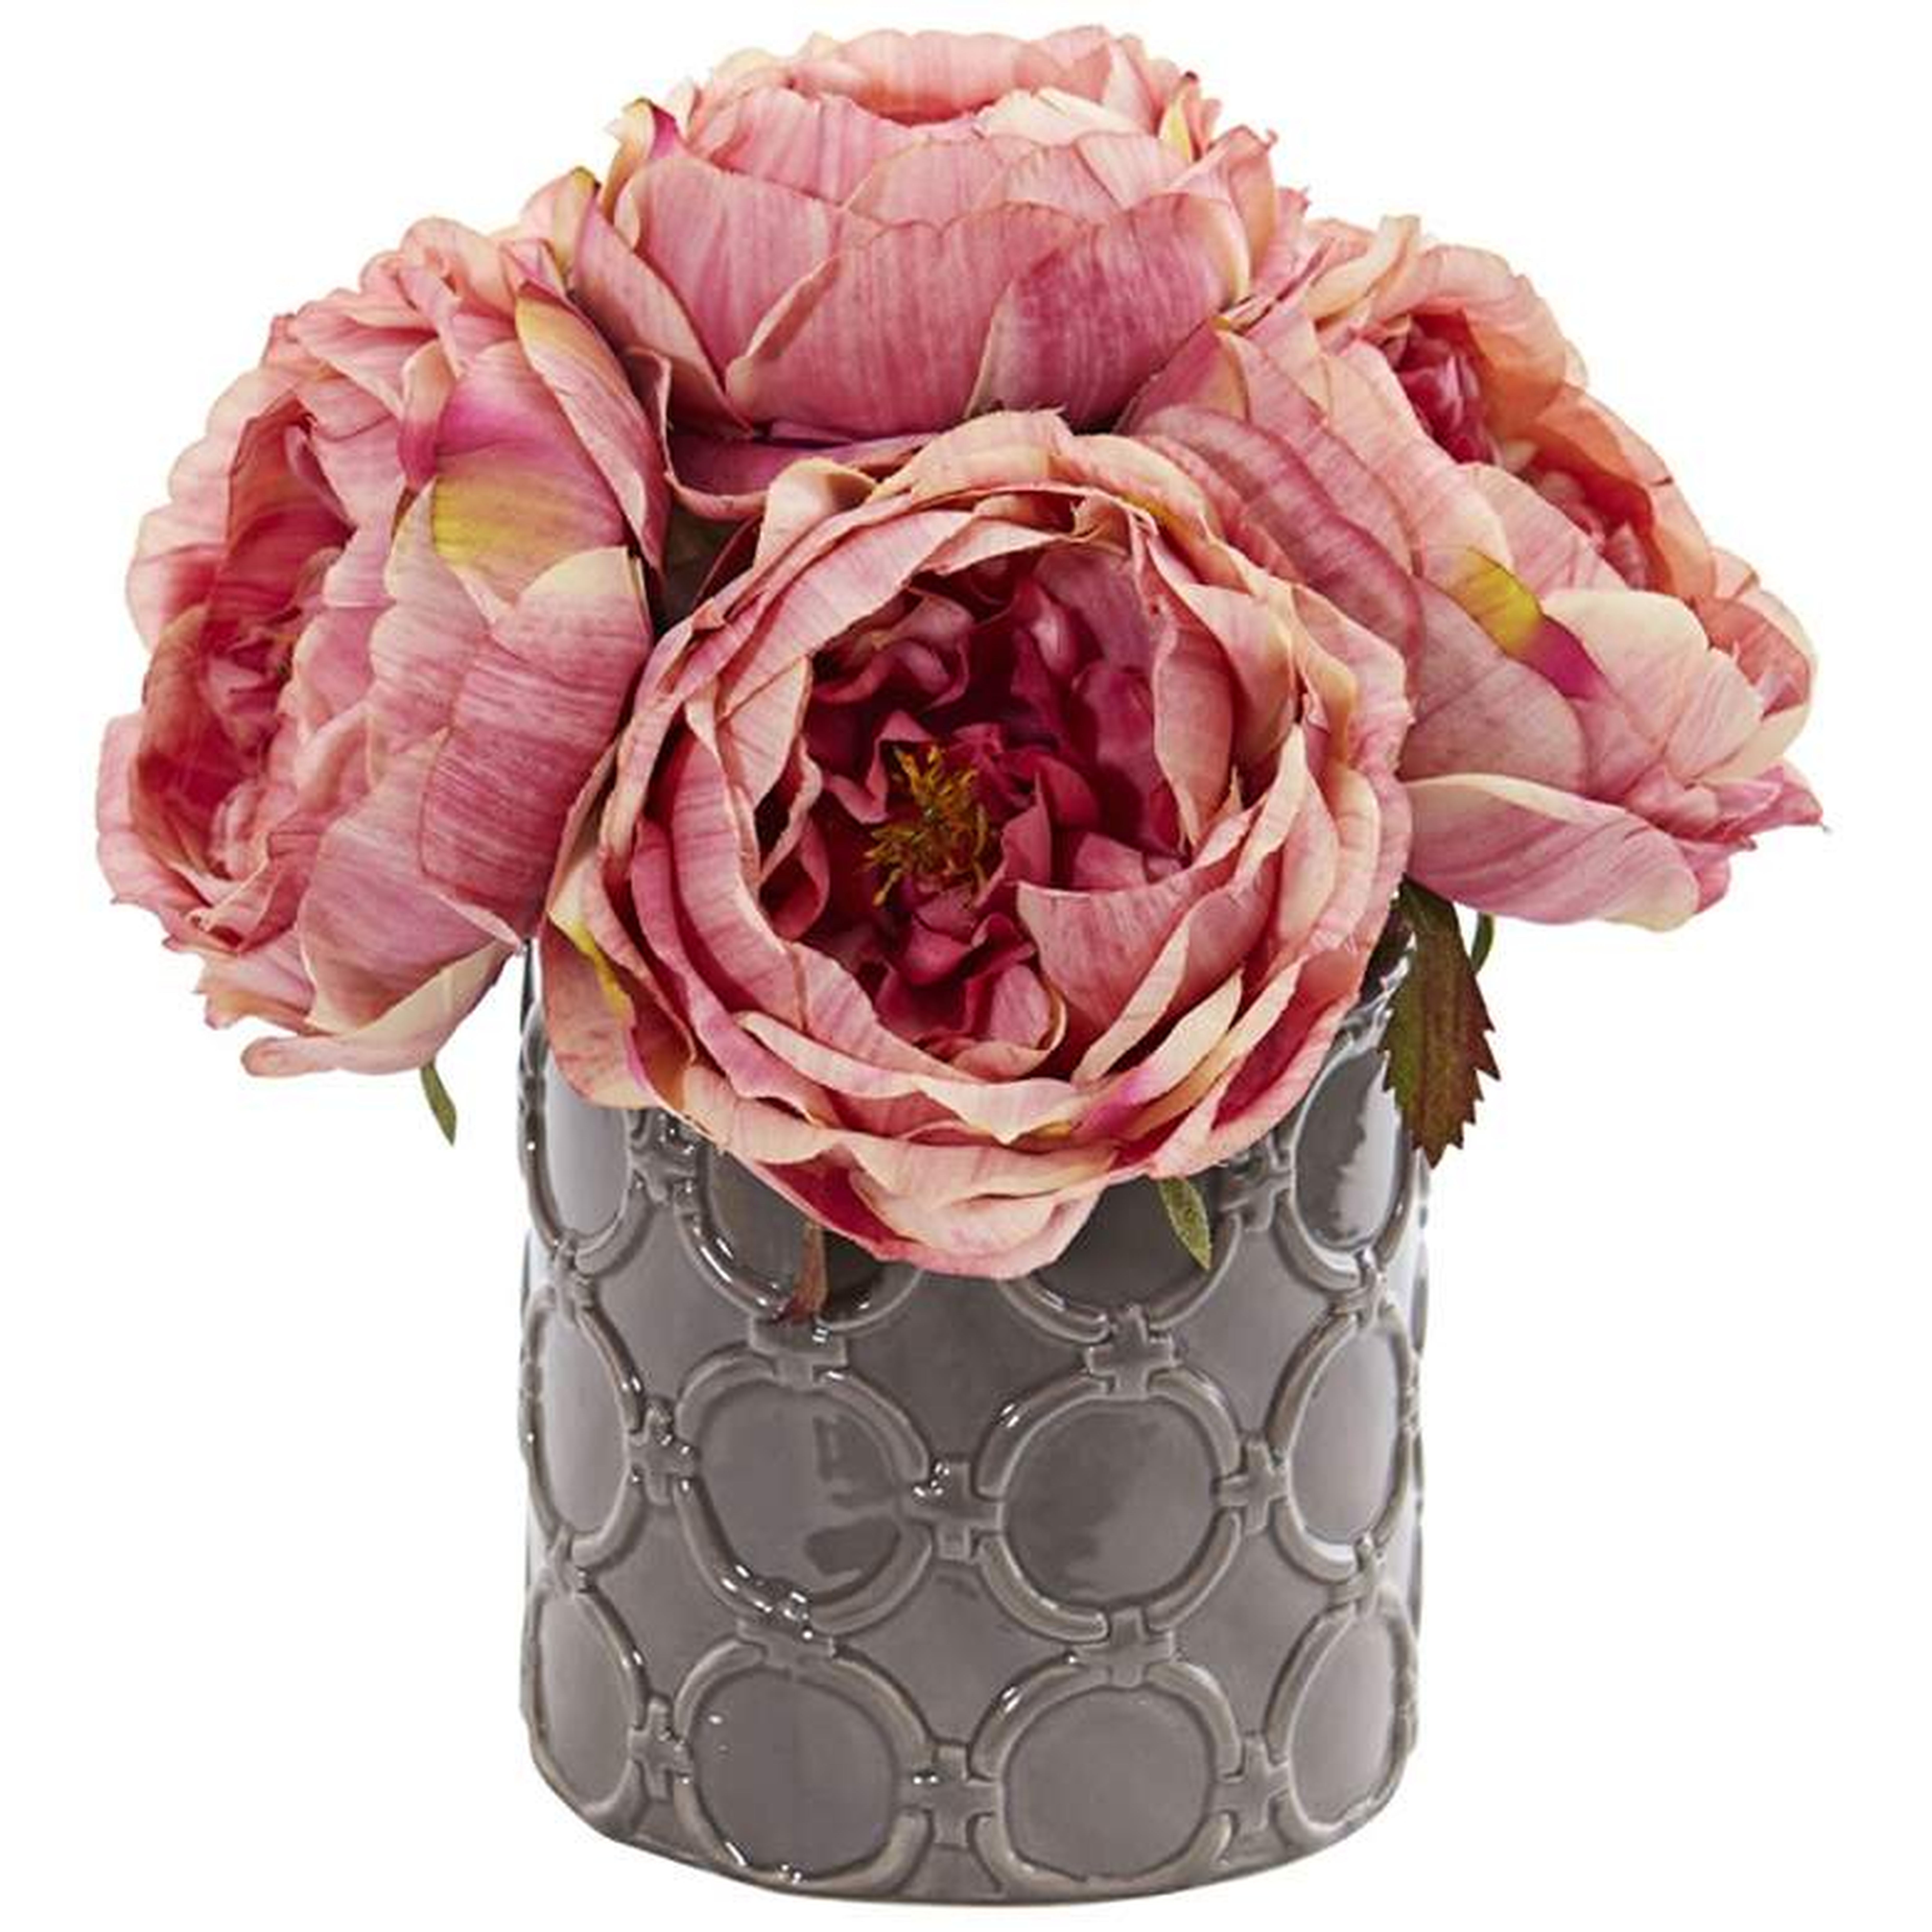 Large Pink Rose 10" High Faux Flowers in Gray Ceramic Vase - Lamps Plus